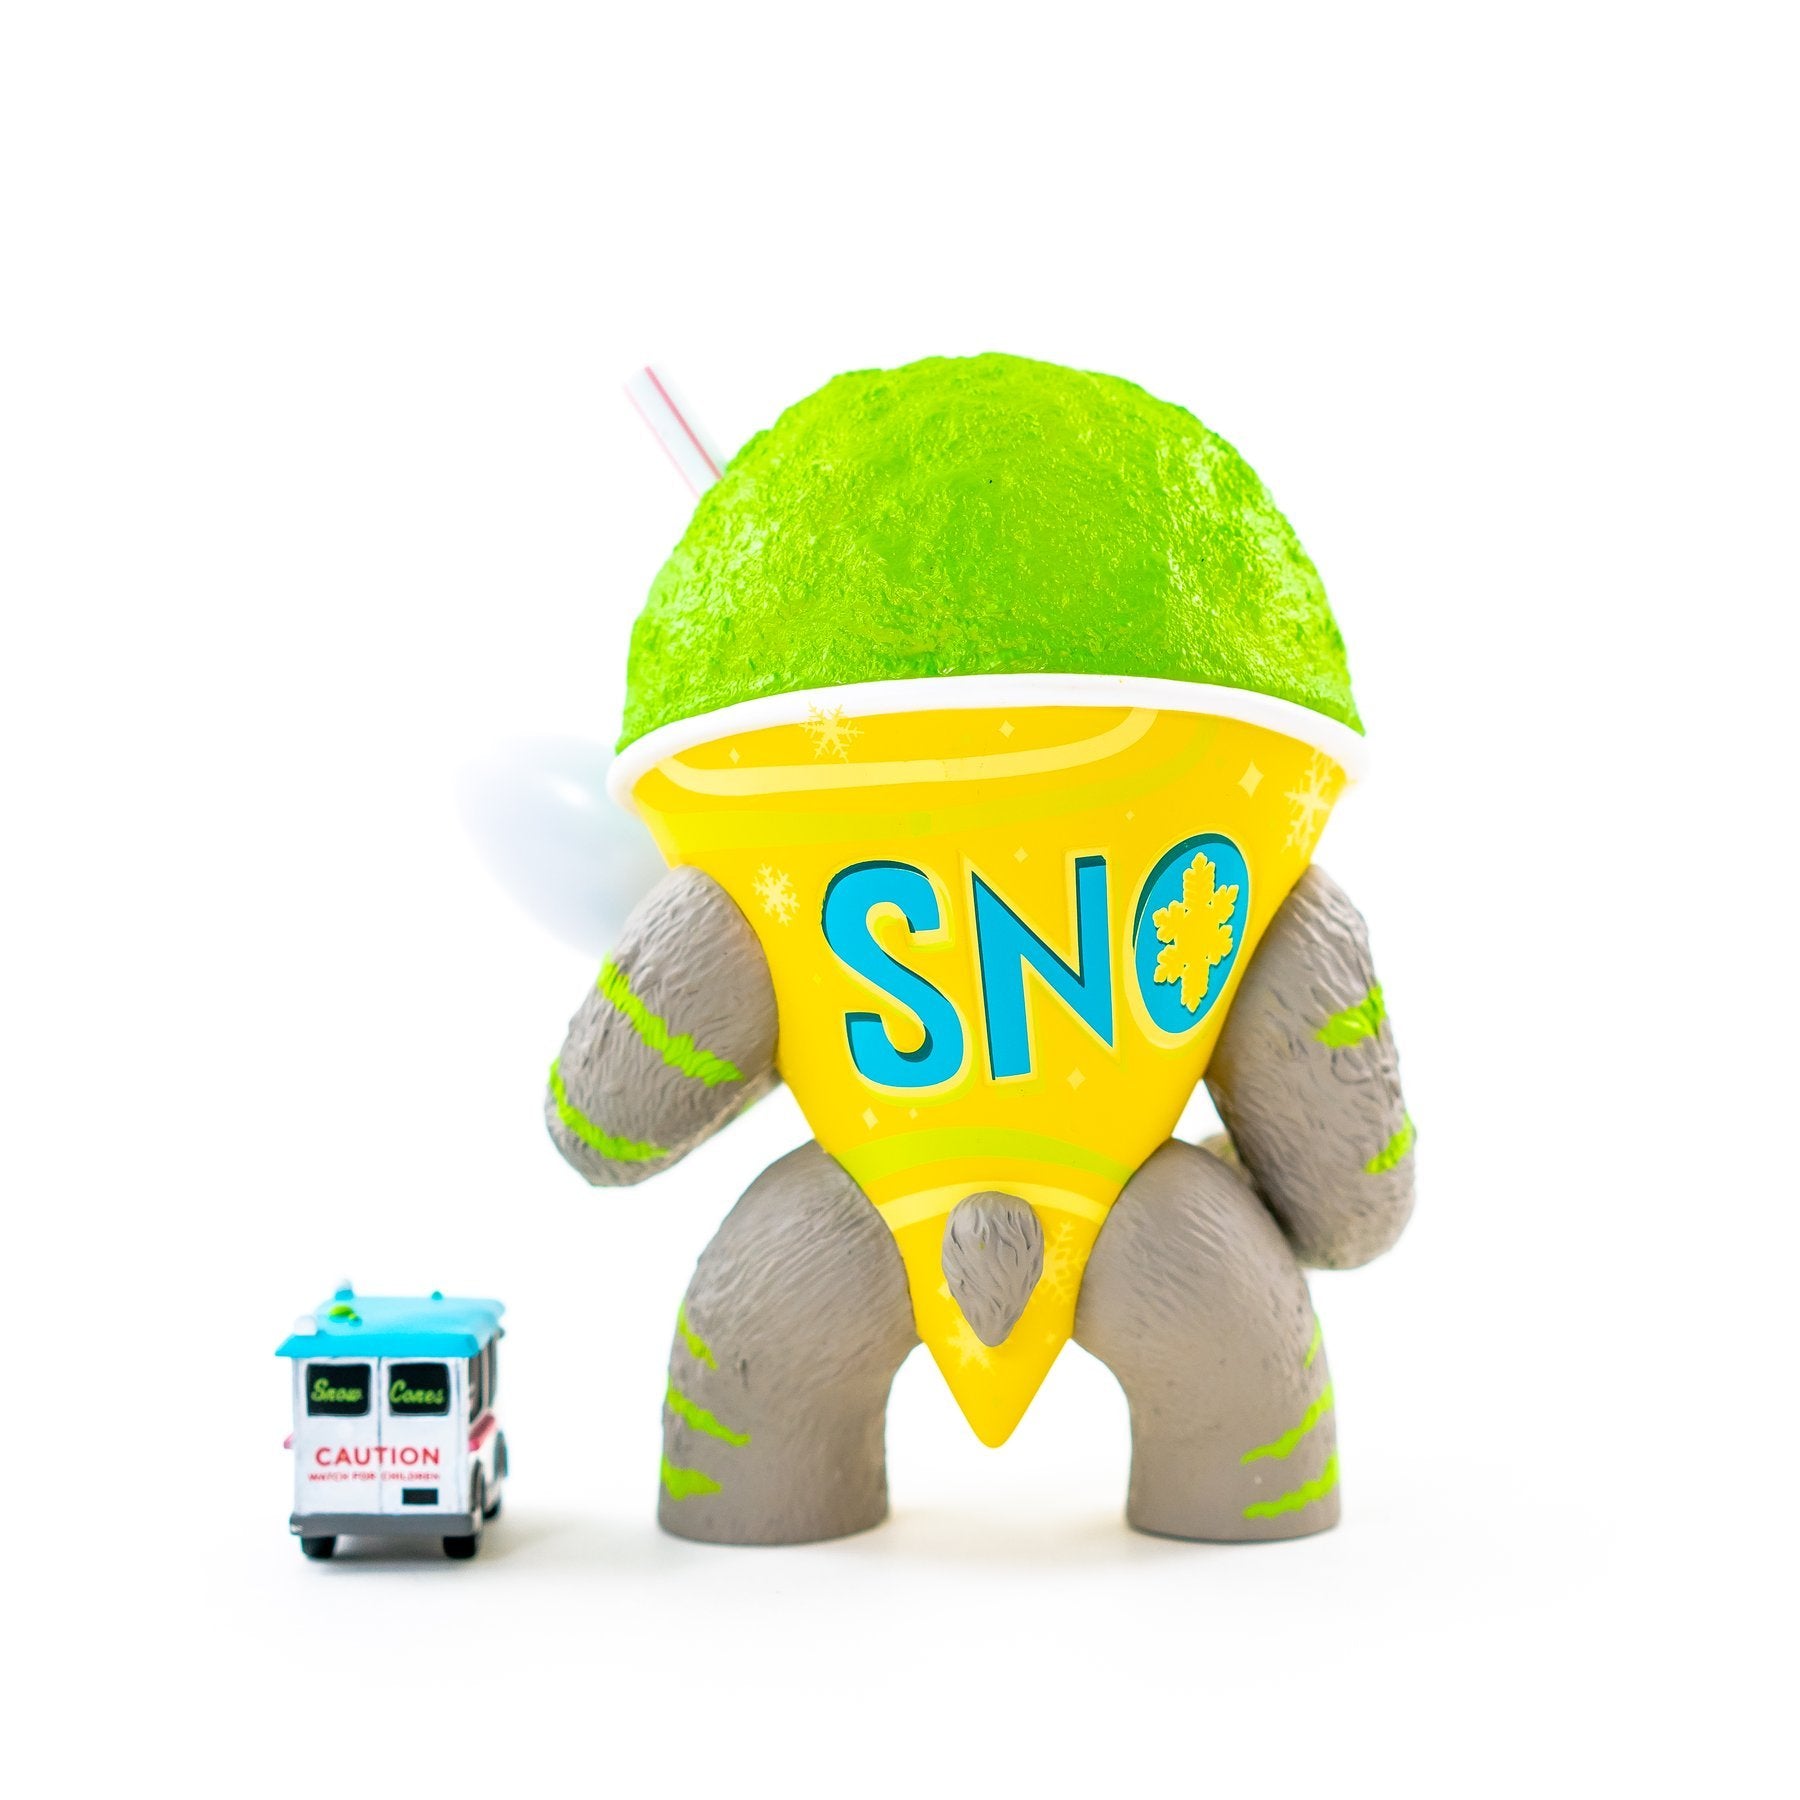 Abominable Snow Cone 2nd Serving - Lime Edition by Jason Limon x Martian Toys